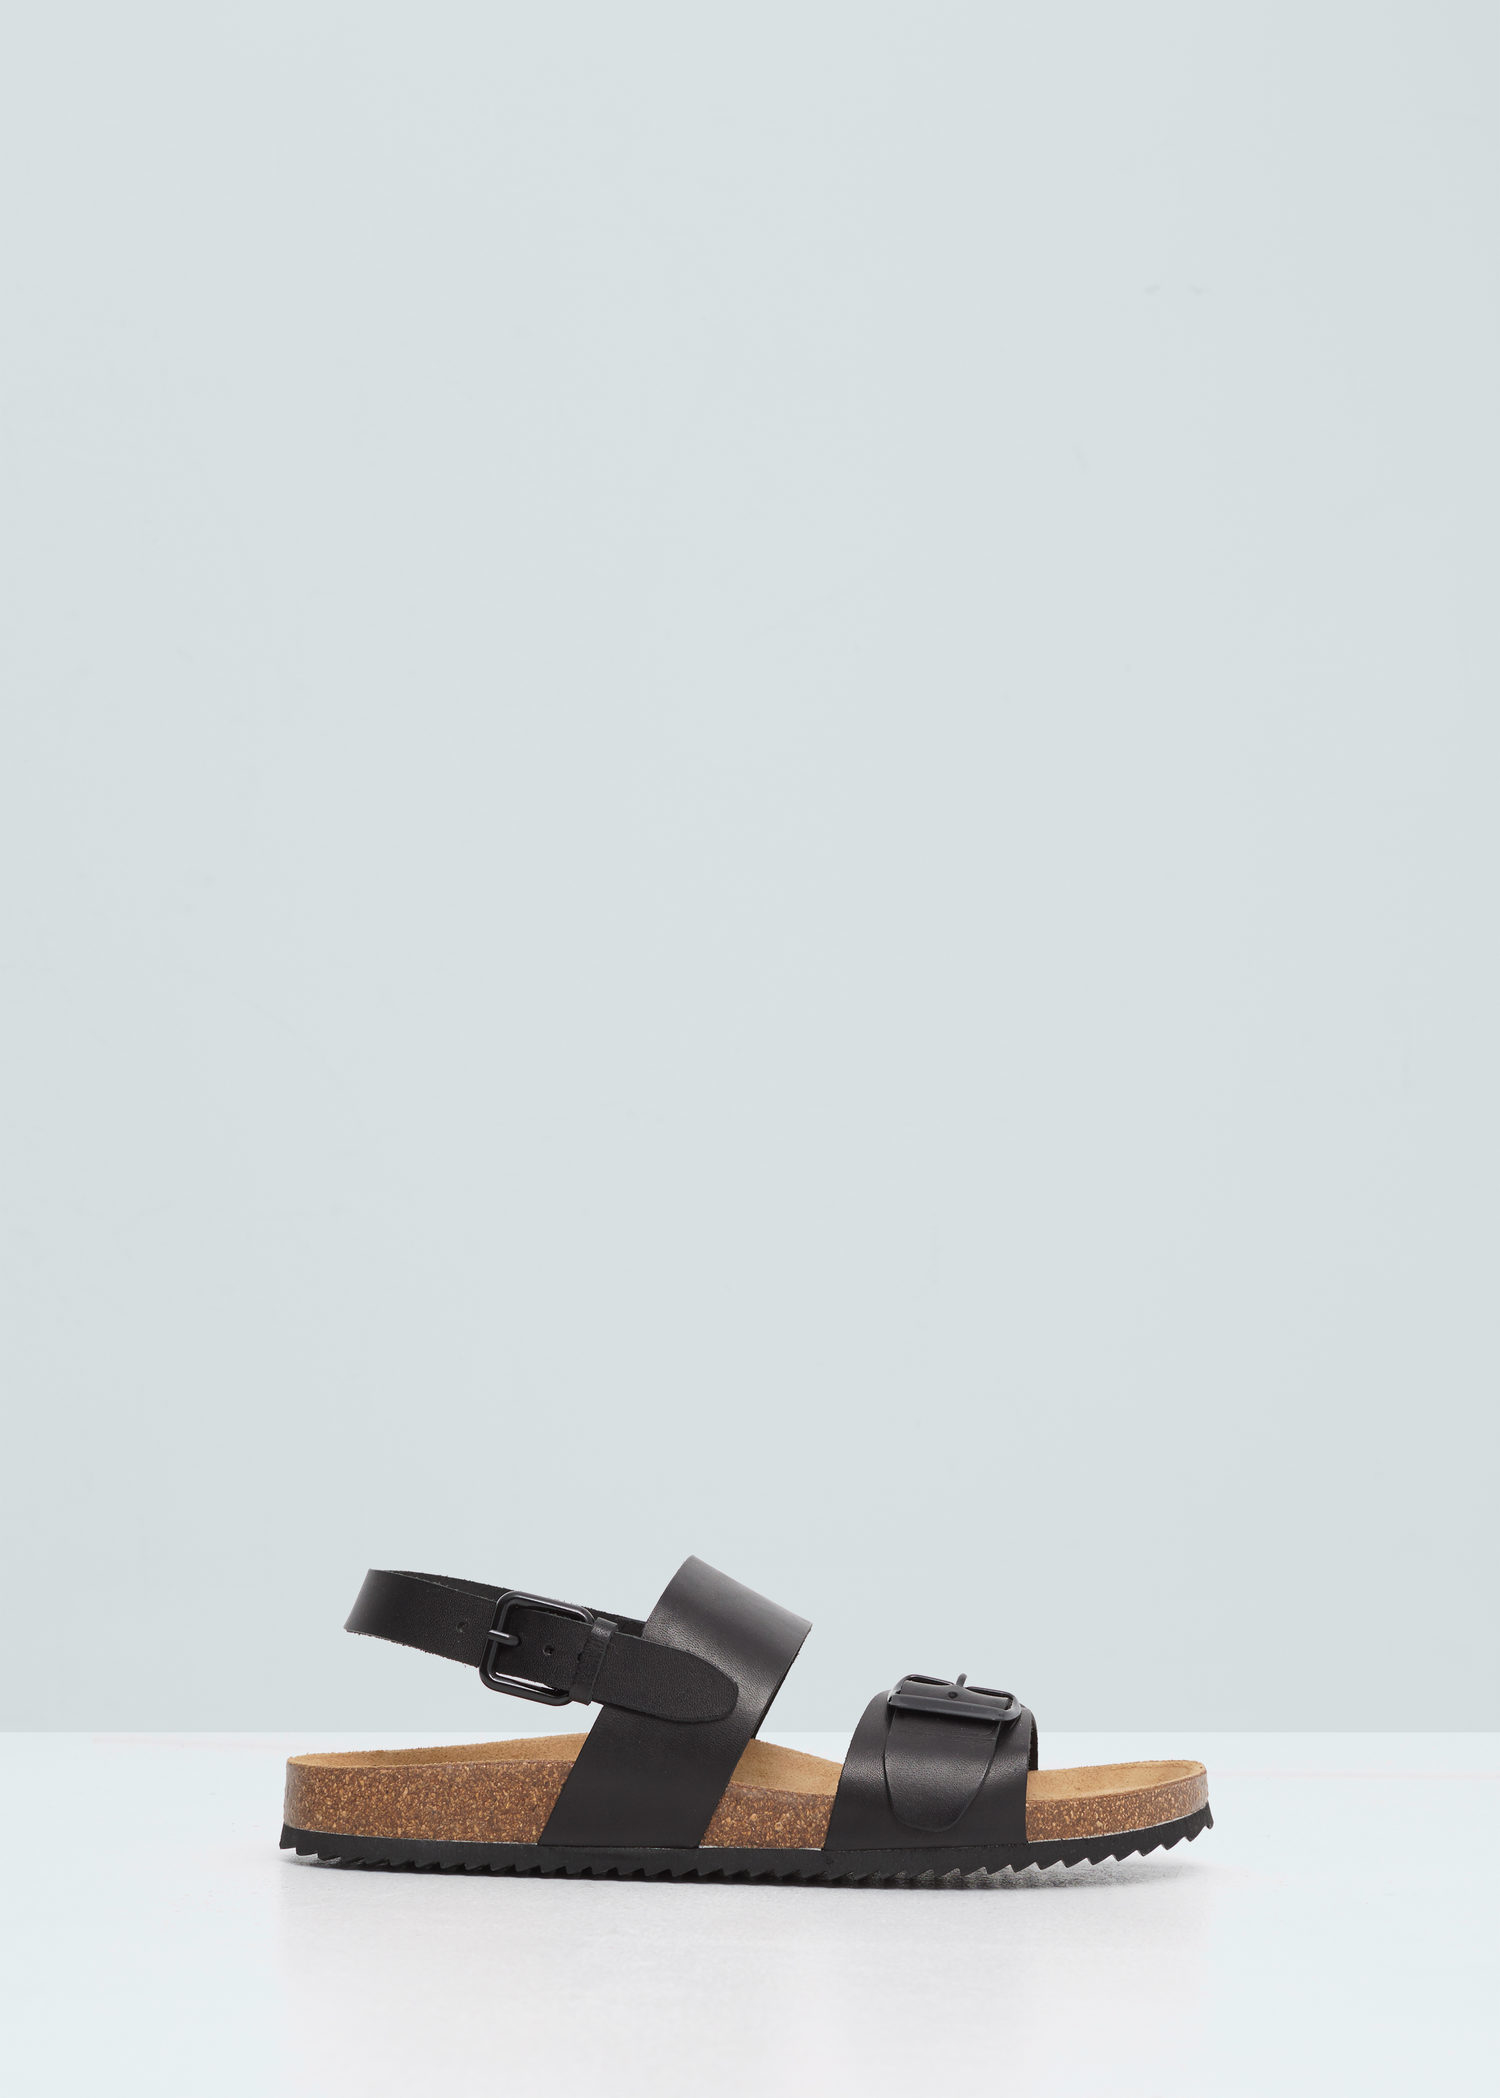 buckle leather sandals